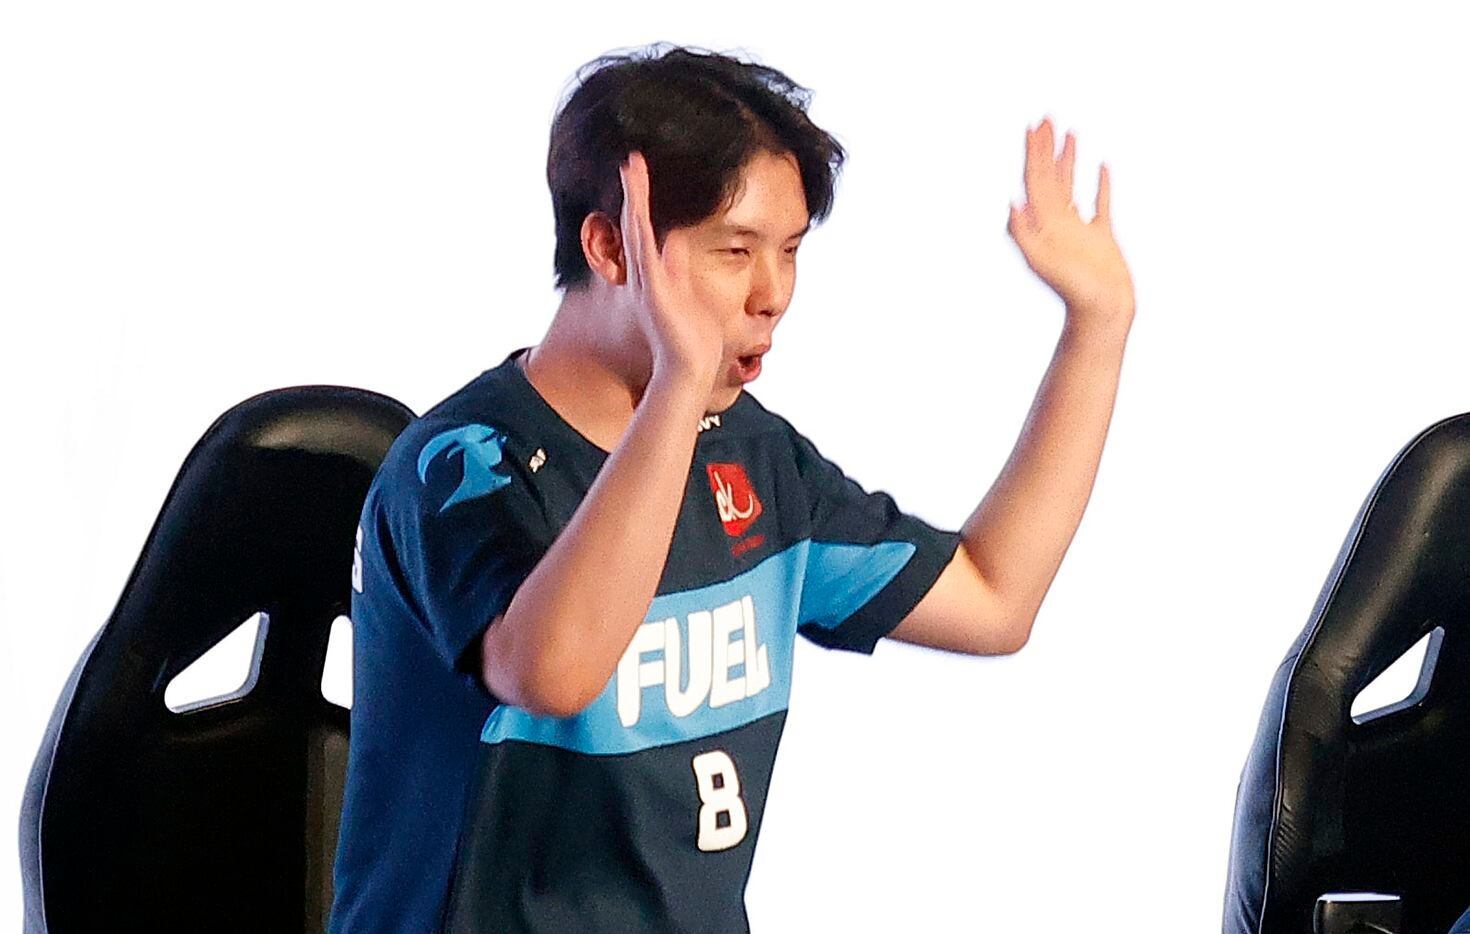 Dallas Fuel player Lee “Fearless” Eui-Seok celebrates after defeating the Houston Outlaws in their Overwatch League game at Esports Stadium Arlington Friday, July 9, 2021. Dallas Fuel defeated Houston in The Battle for Texas, 3-0. It was the first in-person live competition for fans in over a year. Houston competed from their hometown. (Tom Fox/The Dallas Morning News)